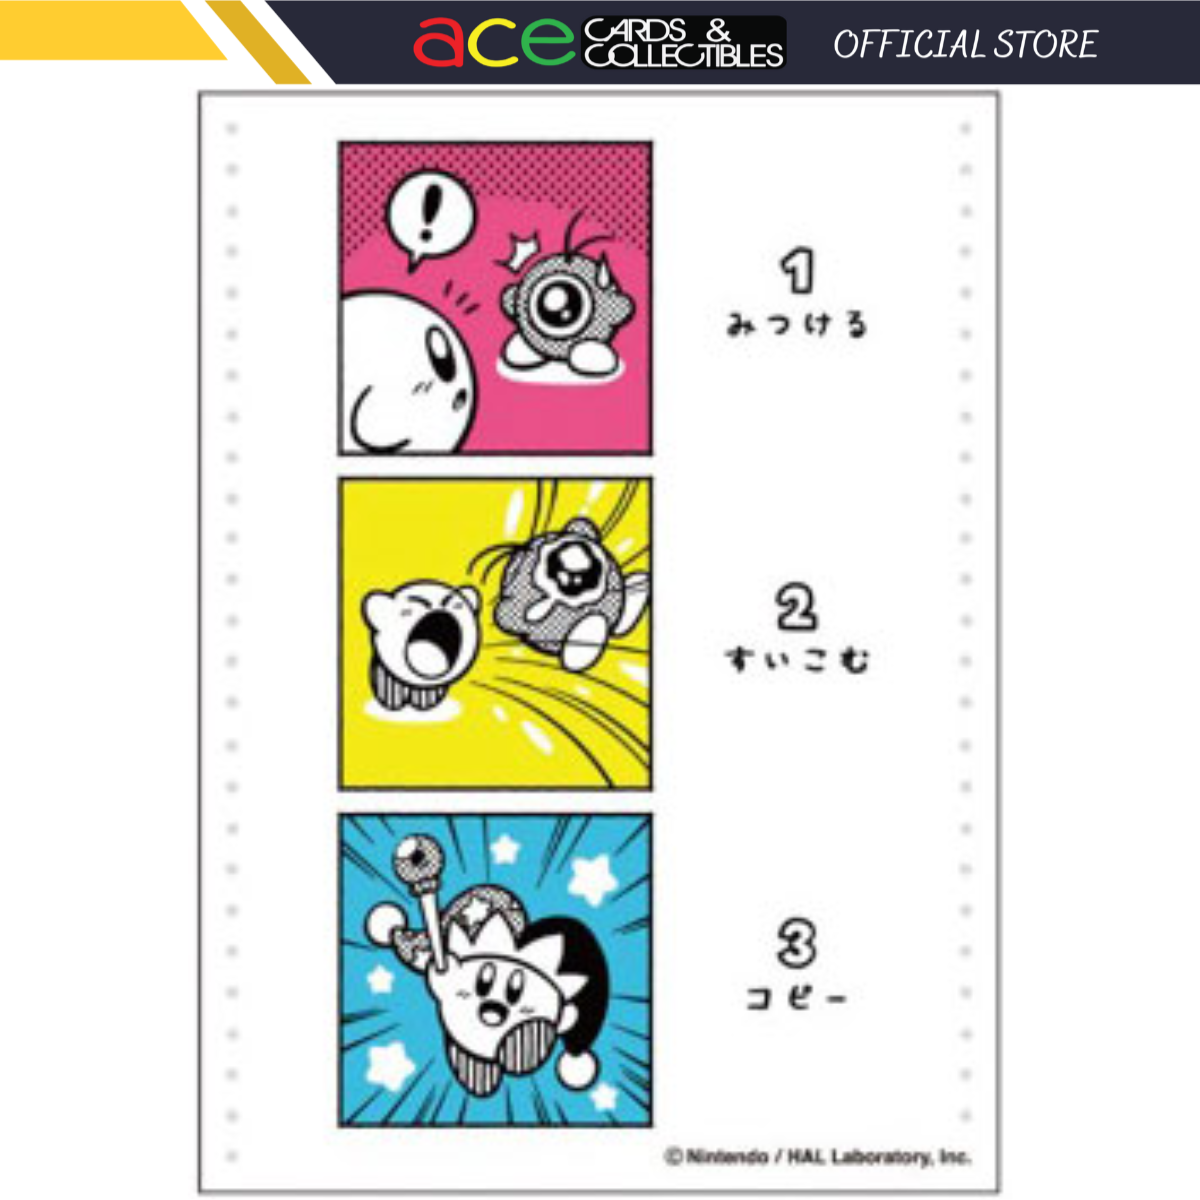 Ensky Character Sleeve - Kirby Horoscope &quot;How To Copy&quot; [EN-1223]-Ensky-Ace Cards &amp; Collectibles